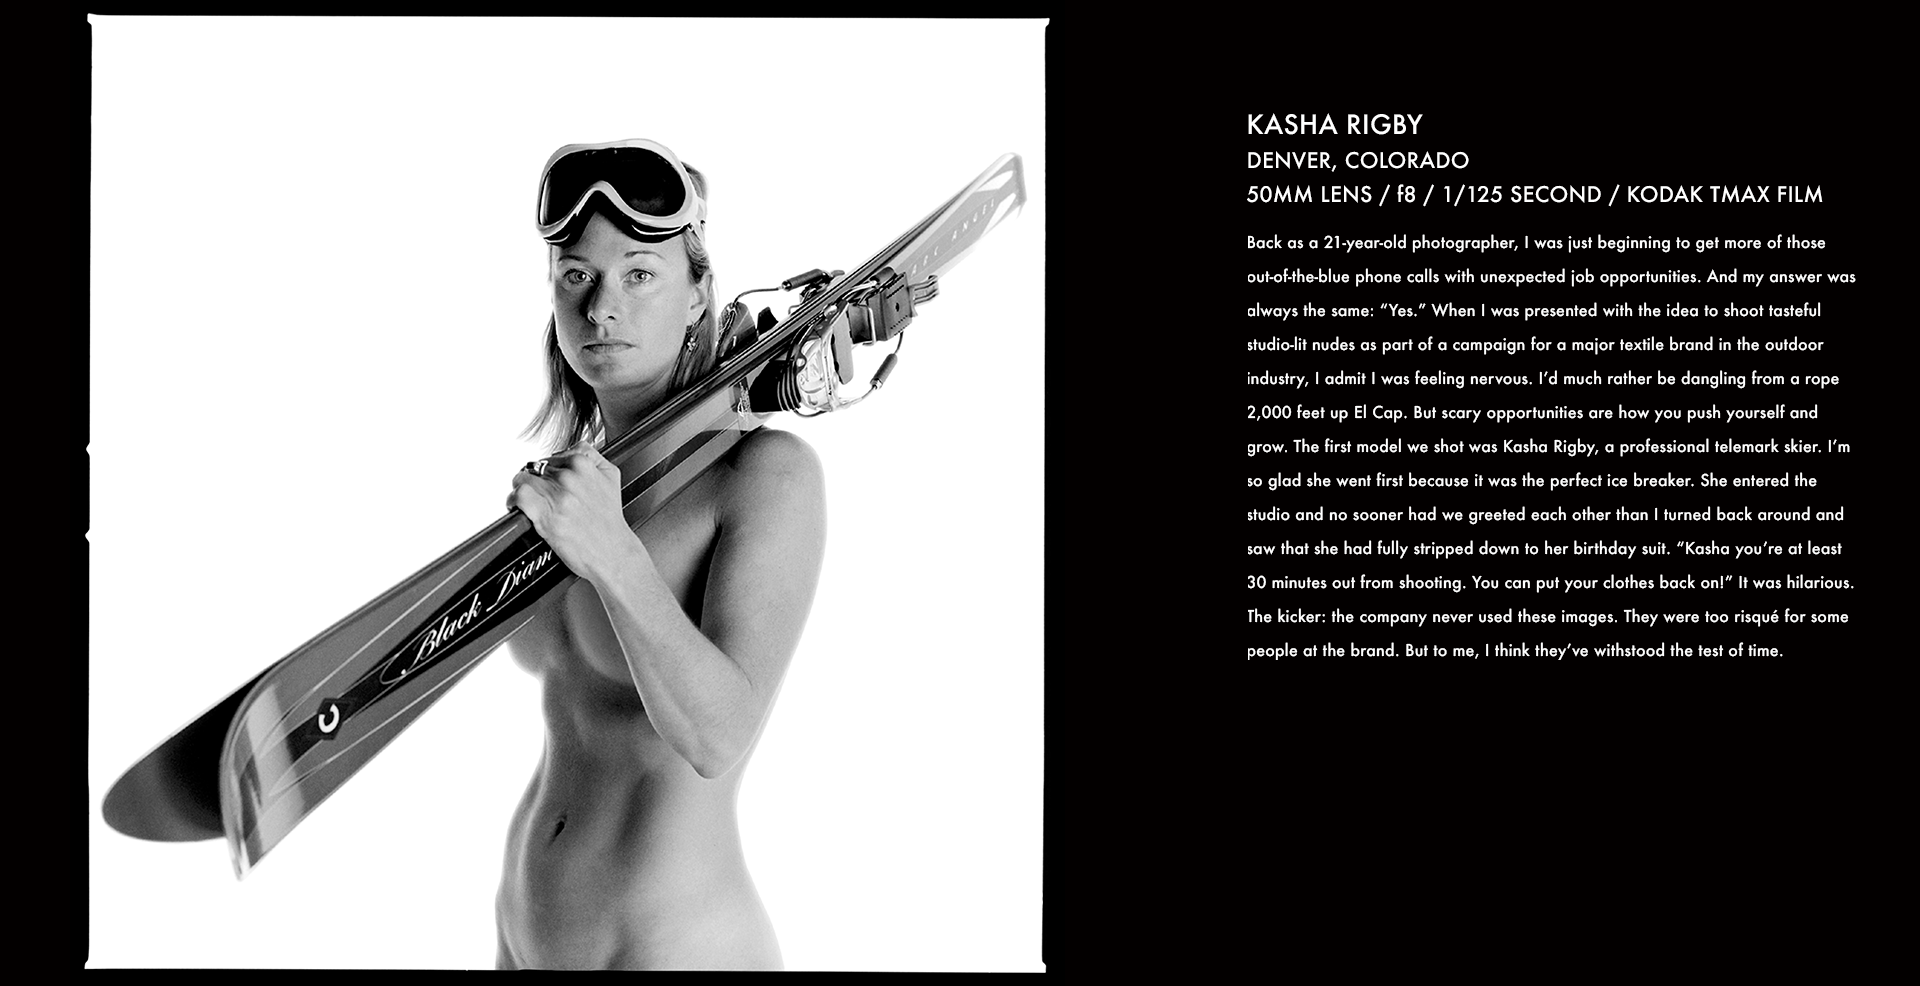  kasha rigby, skiing, portrait, seamless, athlete, body issue, stories behind the images, corey rich, action sports, photo 